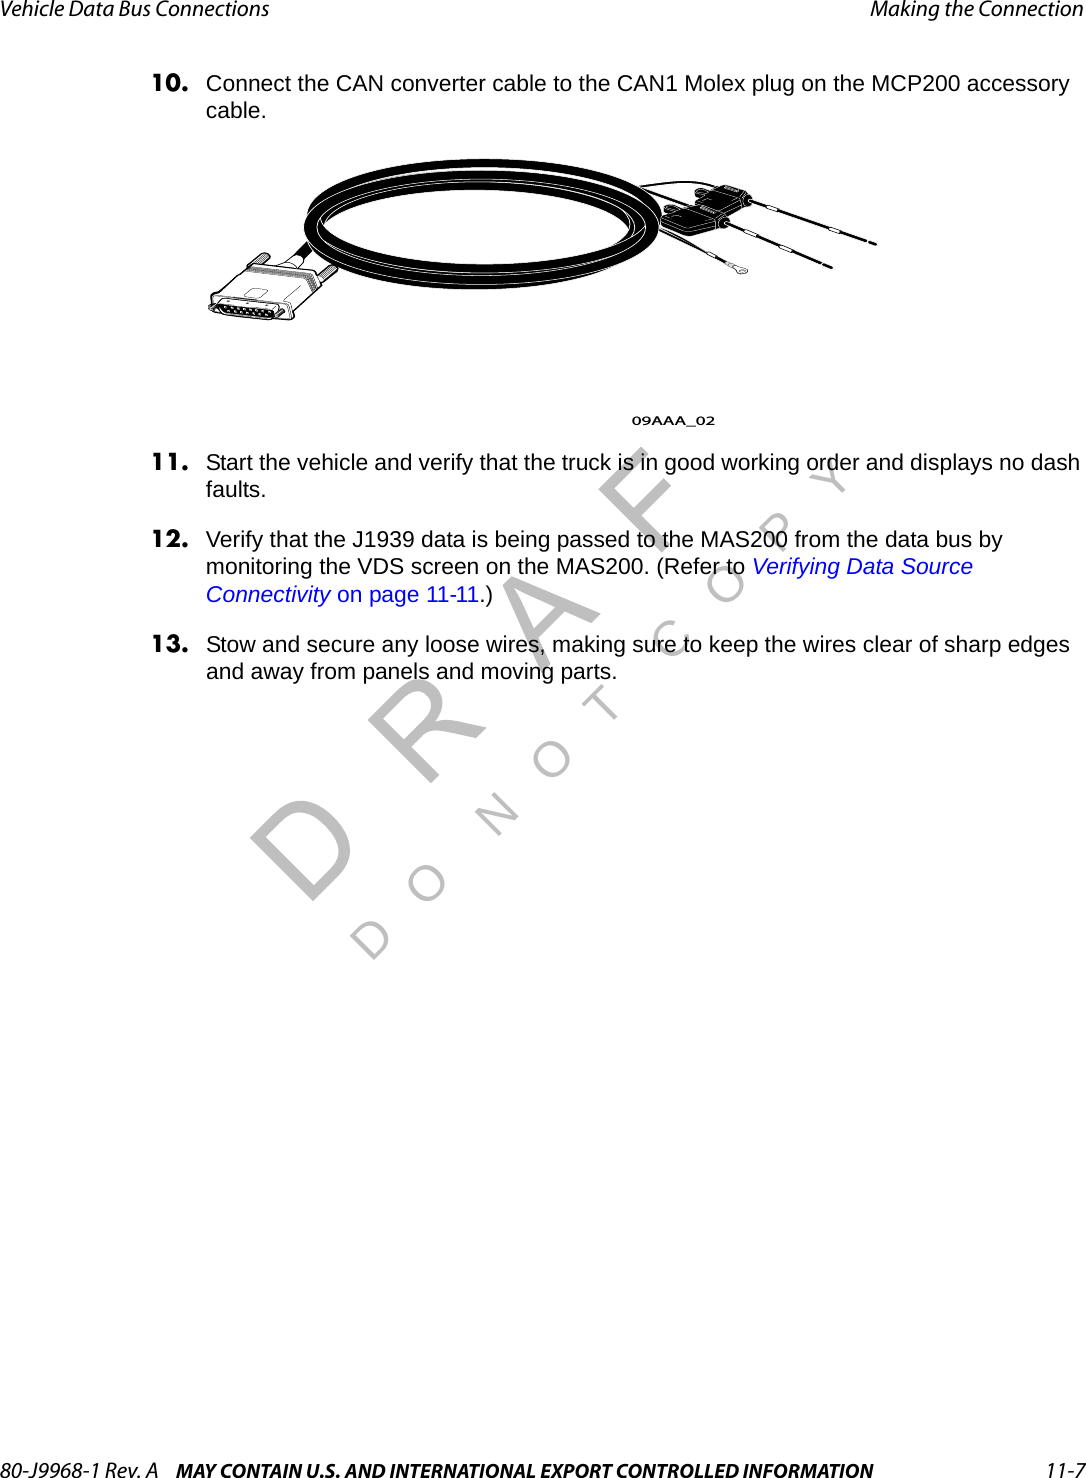 80-J9968-1 Rev. A MAY CONTAIN U.S. AND INTERNATIONAL EXPORT CONTROLLED INFORMATION 11-7Vehicle Data Bus Connections Making the ConnectionDO N OT COPY10. Connect the CAN converter cable to the CAN1 Molex plug on the MCP200 accessory cable.11. Start the vehicle and verify that the truck is in good working order and displays no dash faults.12. Verify that the J1939 data is being passed to the MAS200 from the data bus by monitoring the VDS screen on the MAS200. (Refer to Verifying Data Source Connectivity on page 11-11.)13. Stow and secure any loose wires, making sure to keep the wires clear of sharp edges and away from panels and moving parts.09AAA_02